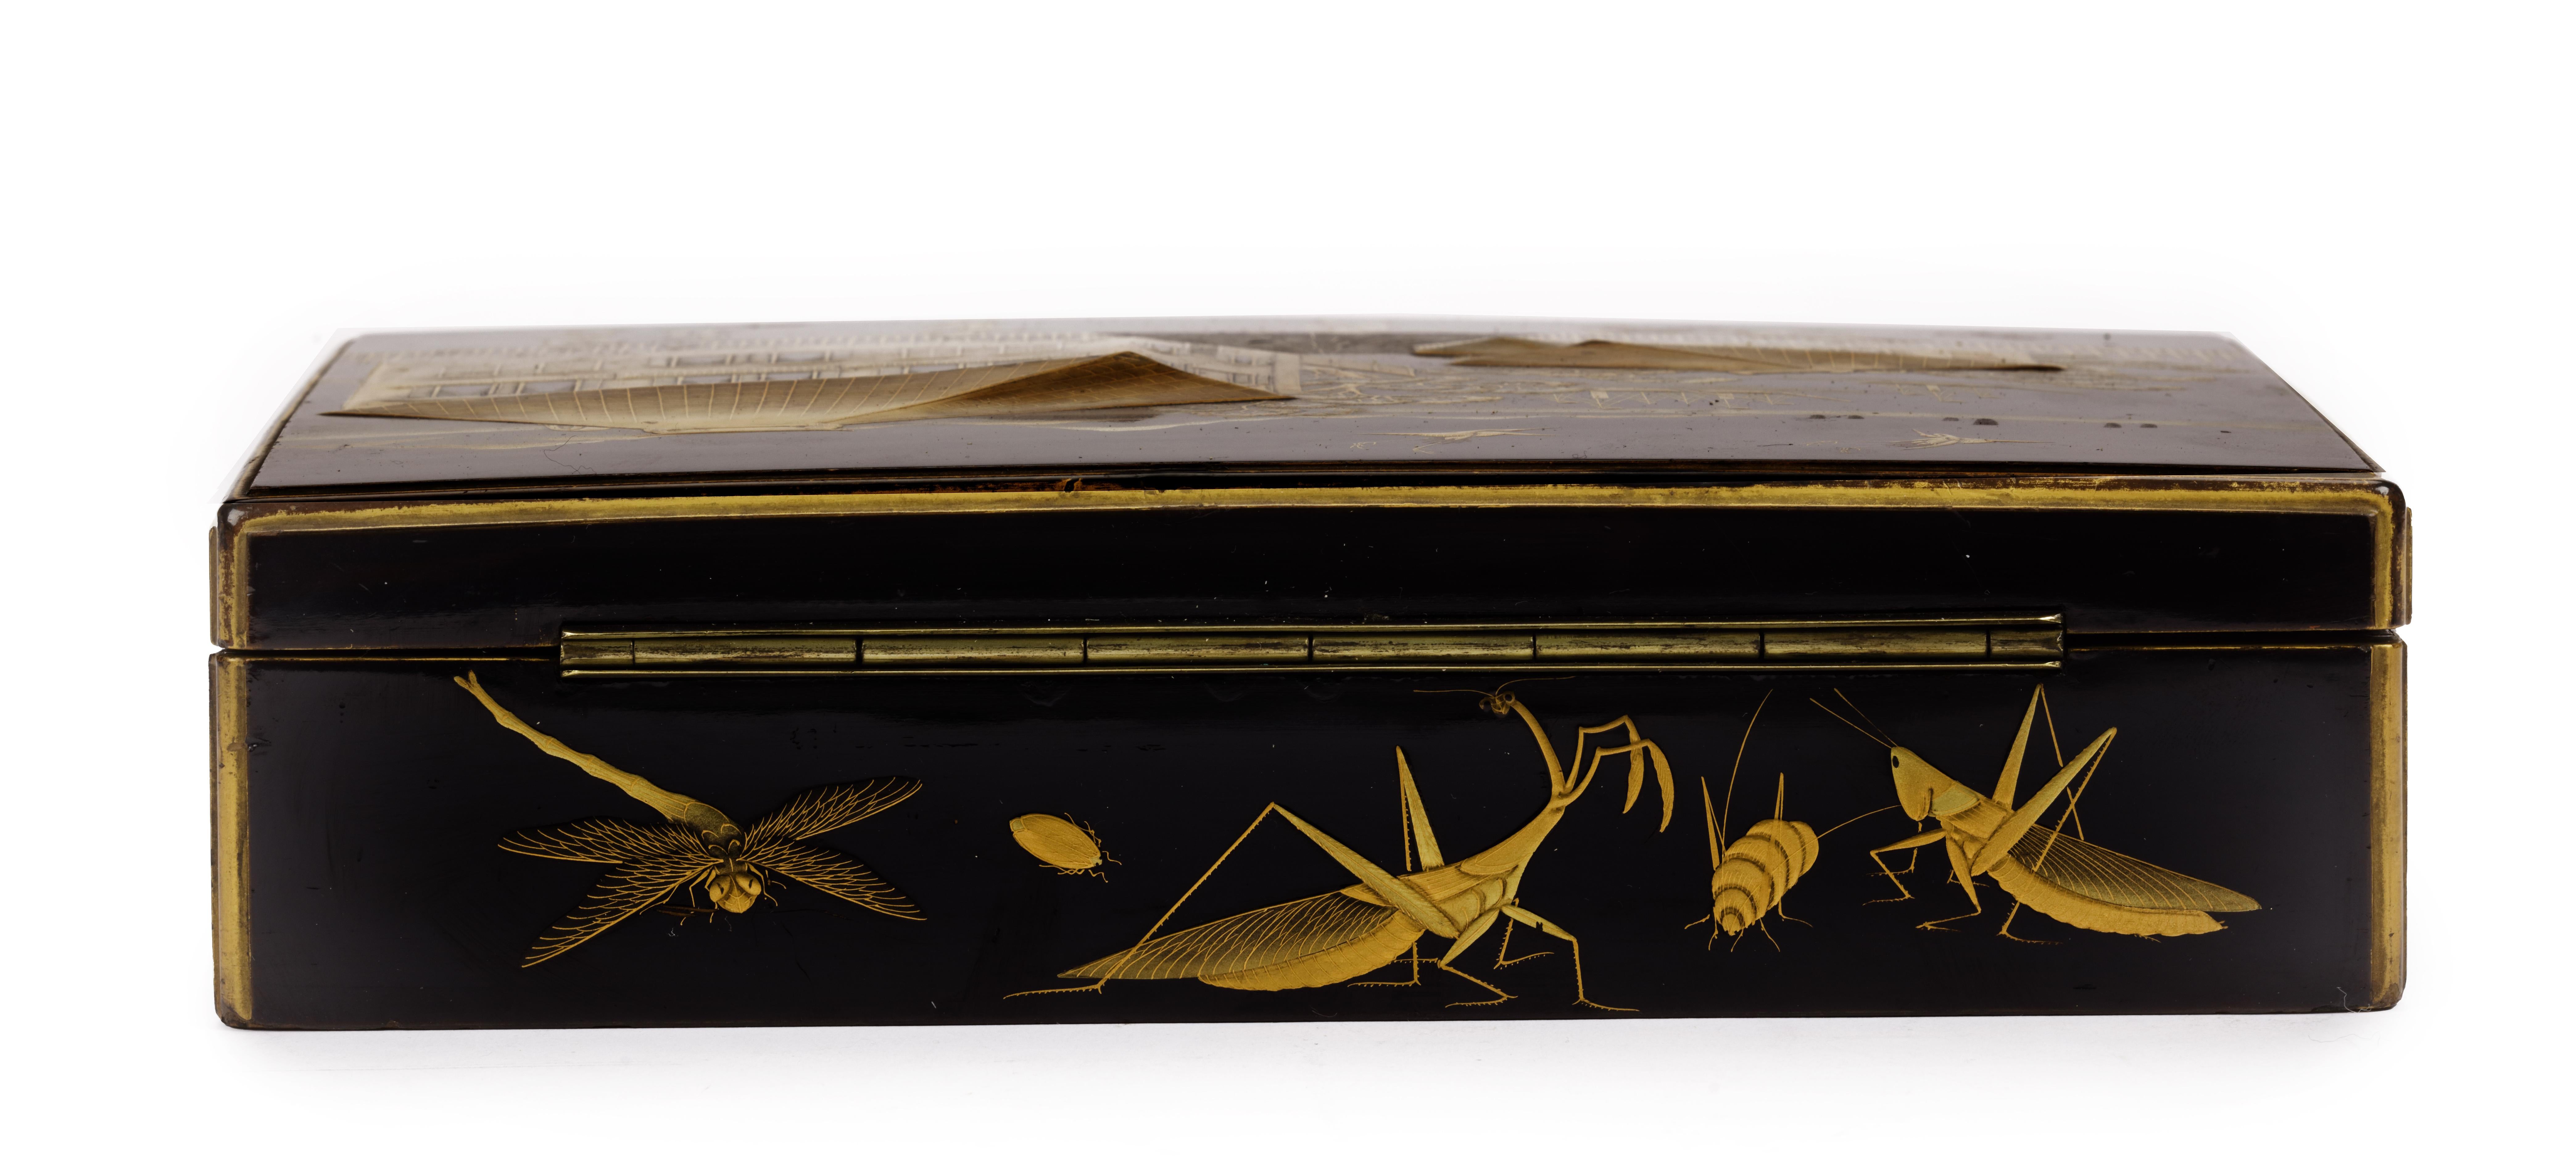 19th Century A Japanese export lacquer box with depiction of the Grand Hotel, Yokohama For Sale